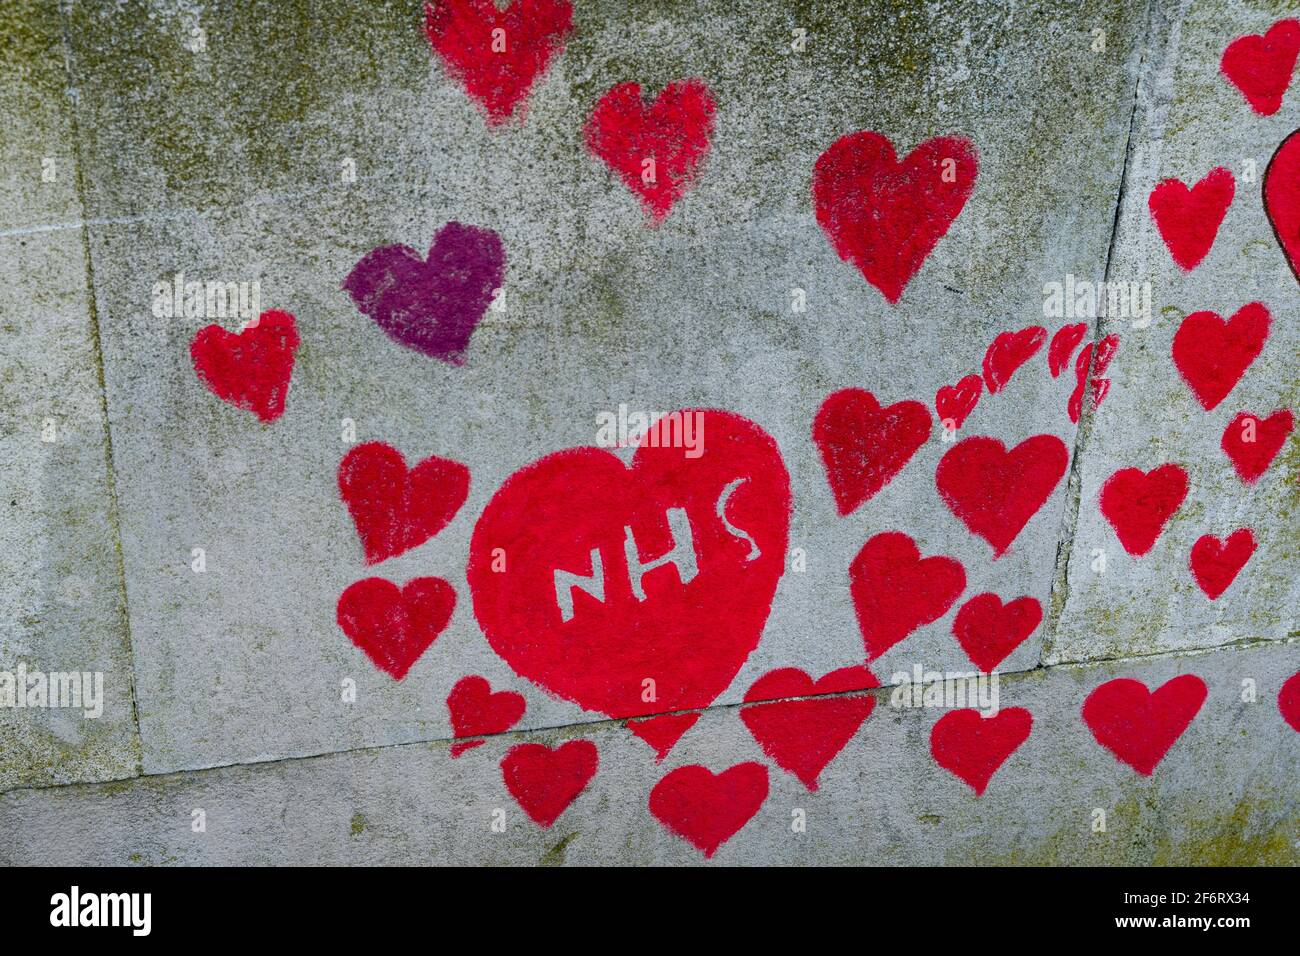 NHS written inside a red heart on The national covid memorial wall, London south bank , on the Embankment, England Stock Photo